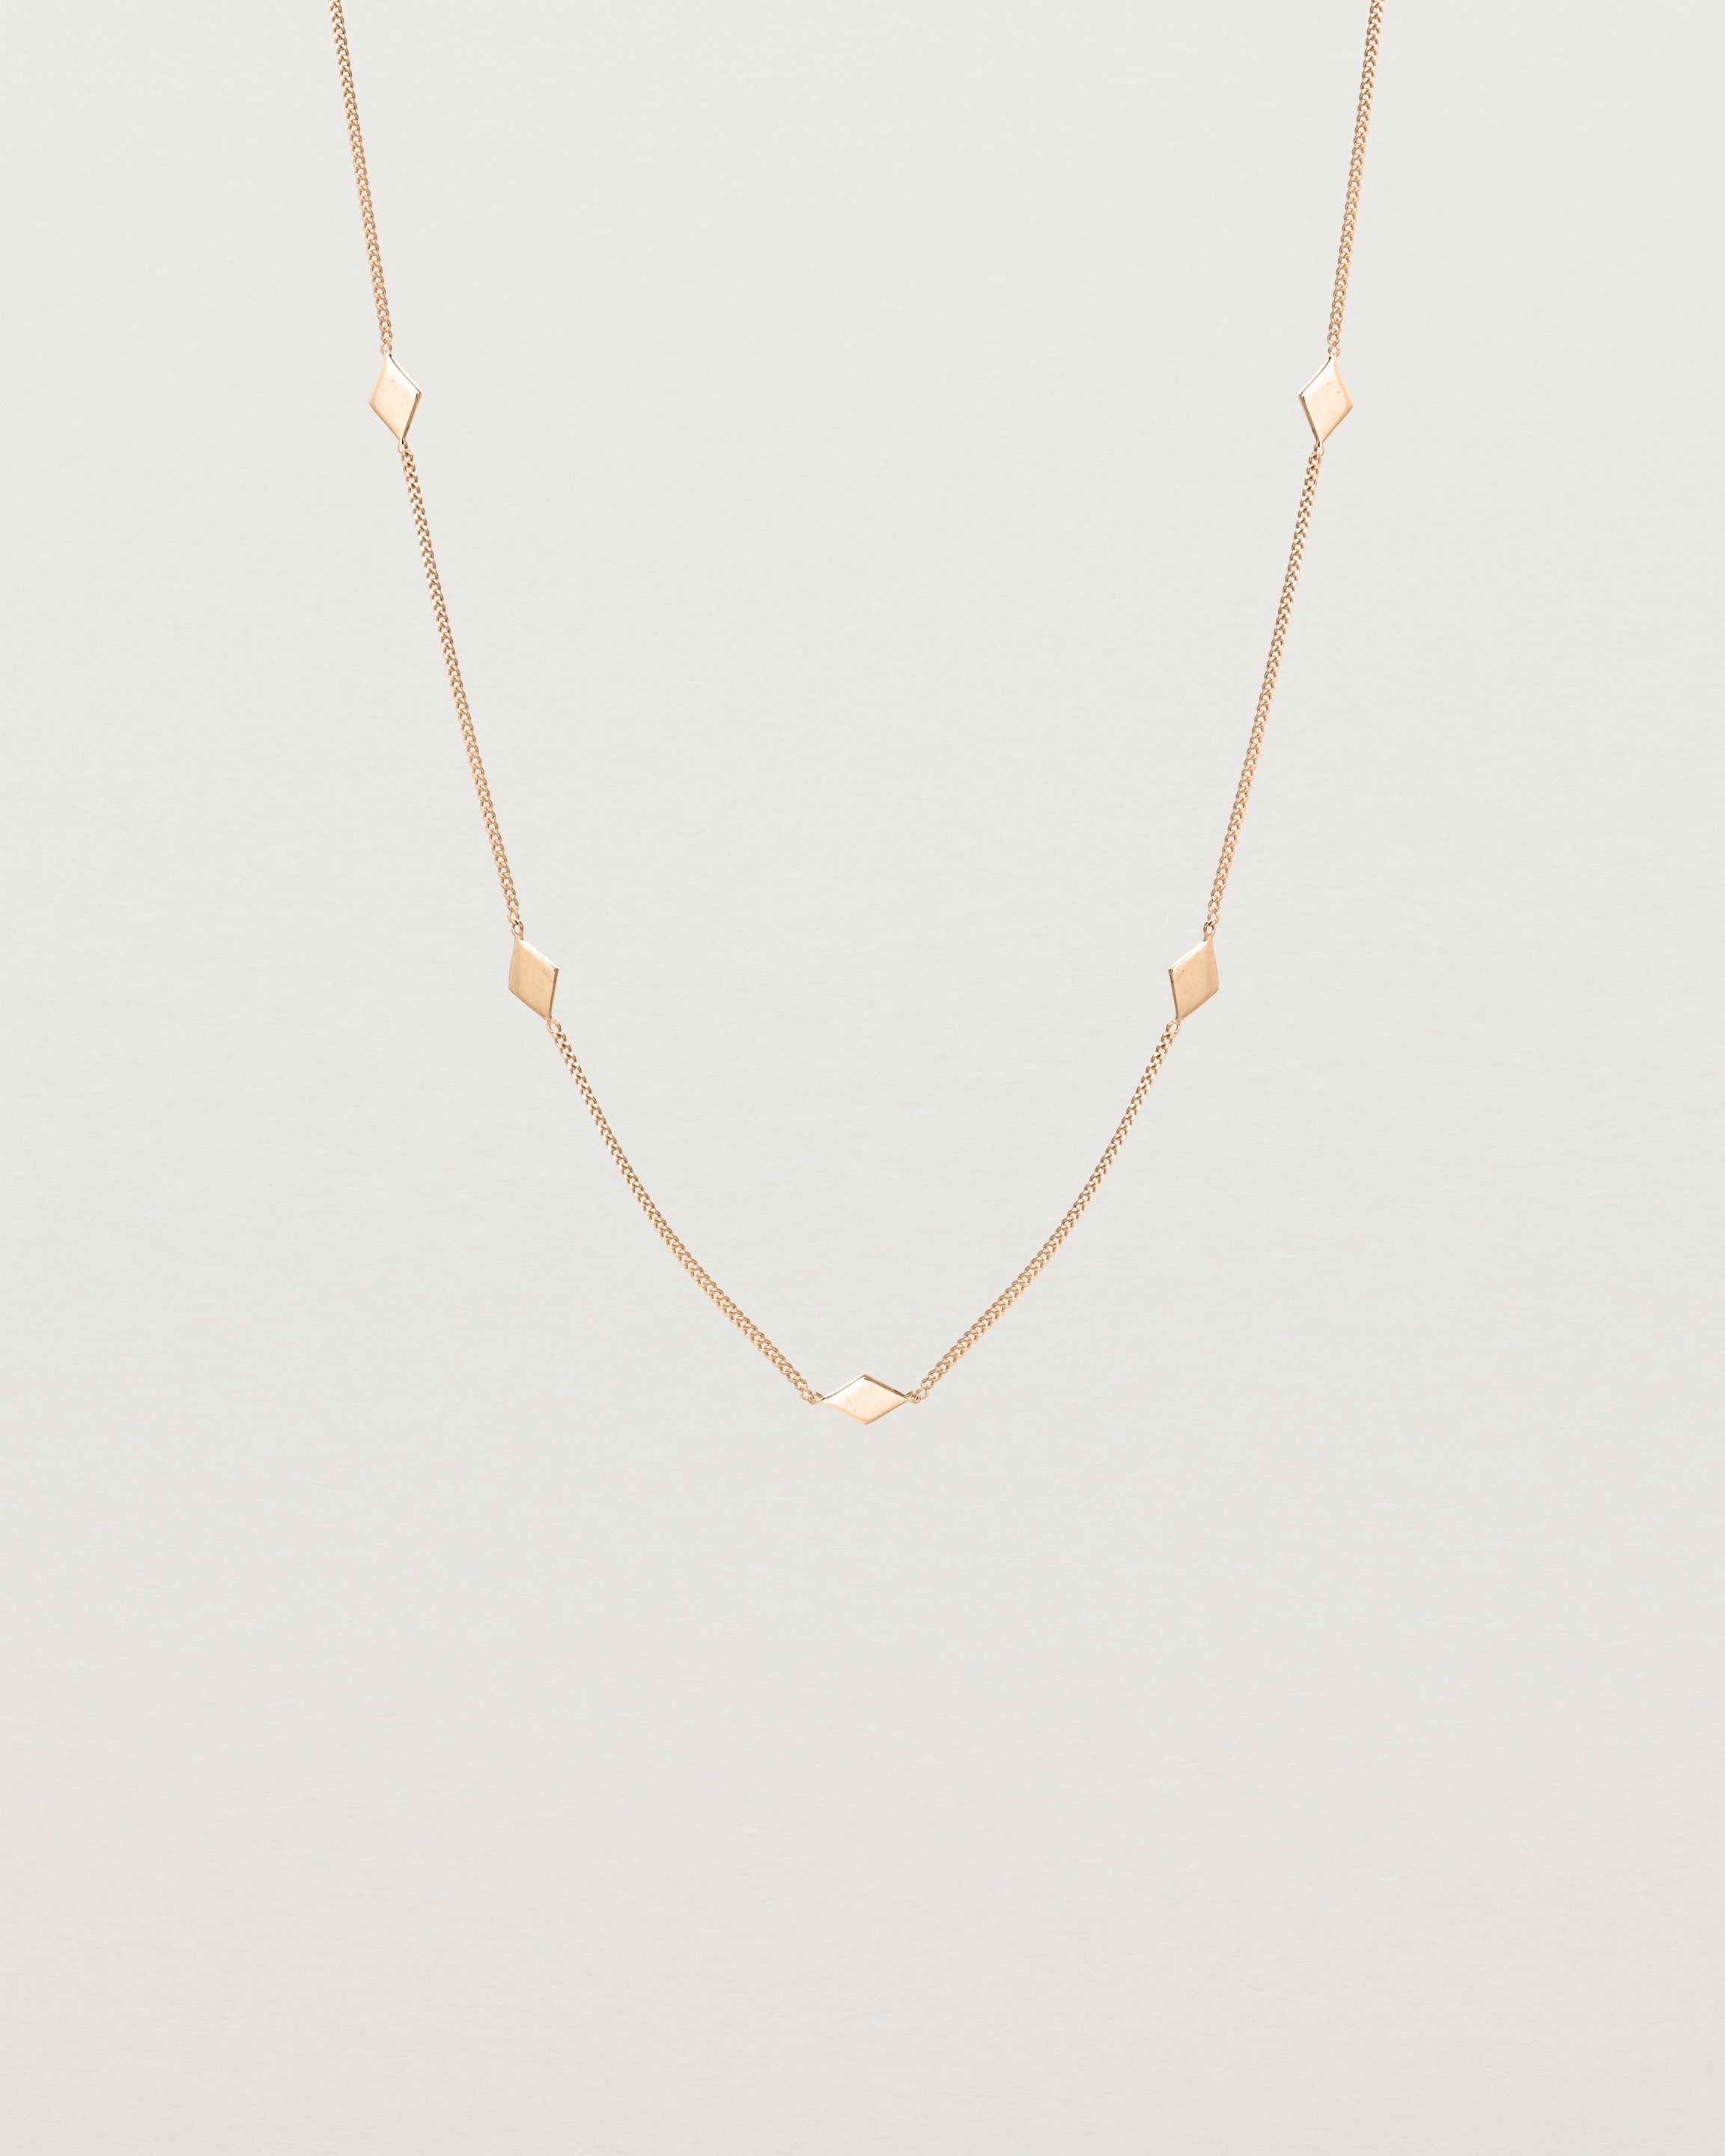 Front view of the Nuna Charm Necklace in rose gold.